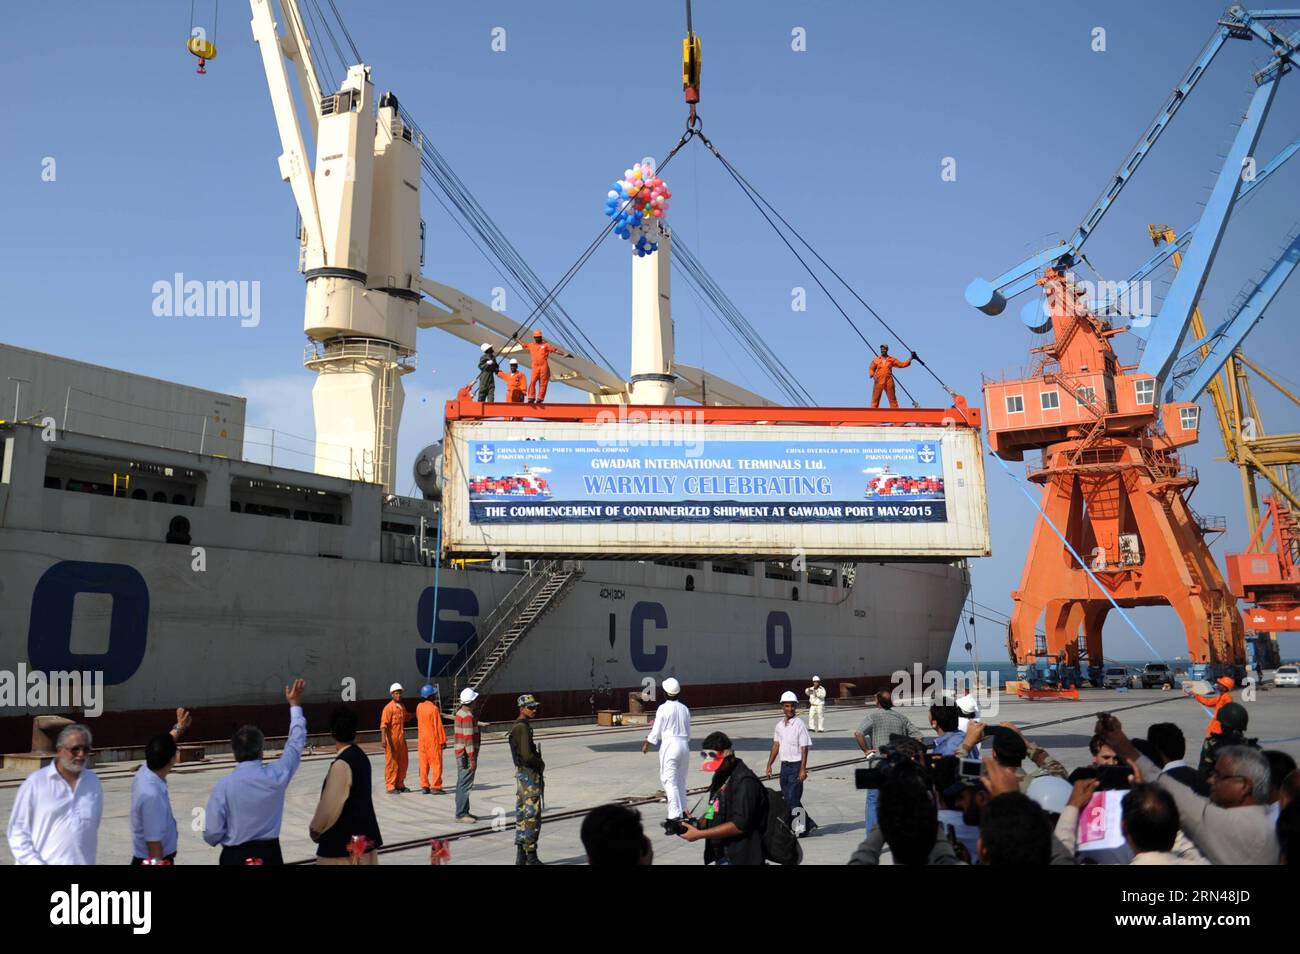 (150512) -- KARACHI,   -- A container is loaded to a ship during the inaugration ceremony of container service at a pier of Gwadar Port, southwestern Pakistan, on May 11, 2015. Gwadar Port, a warm-water, deep-sea port, is located at the mouth of the Persian Gulf in Gwadar of Pakistan s Baloschistan province. China and Pakistan agreed to build China-Pakistan Economic Corridor (CPEC) to connect the Pakistani port with Kashgar city in China s Xinjiang Uygur Autonomous Region. It will shorten China s routes of oil and gas imports from Africa and the Middle East for thousands of kilometers, making Stock Photo